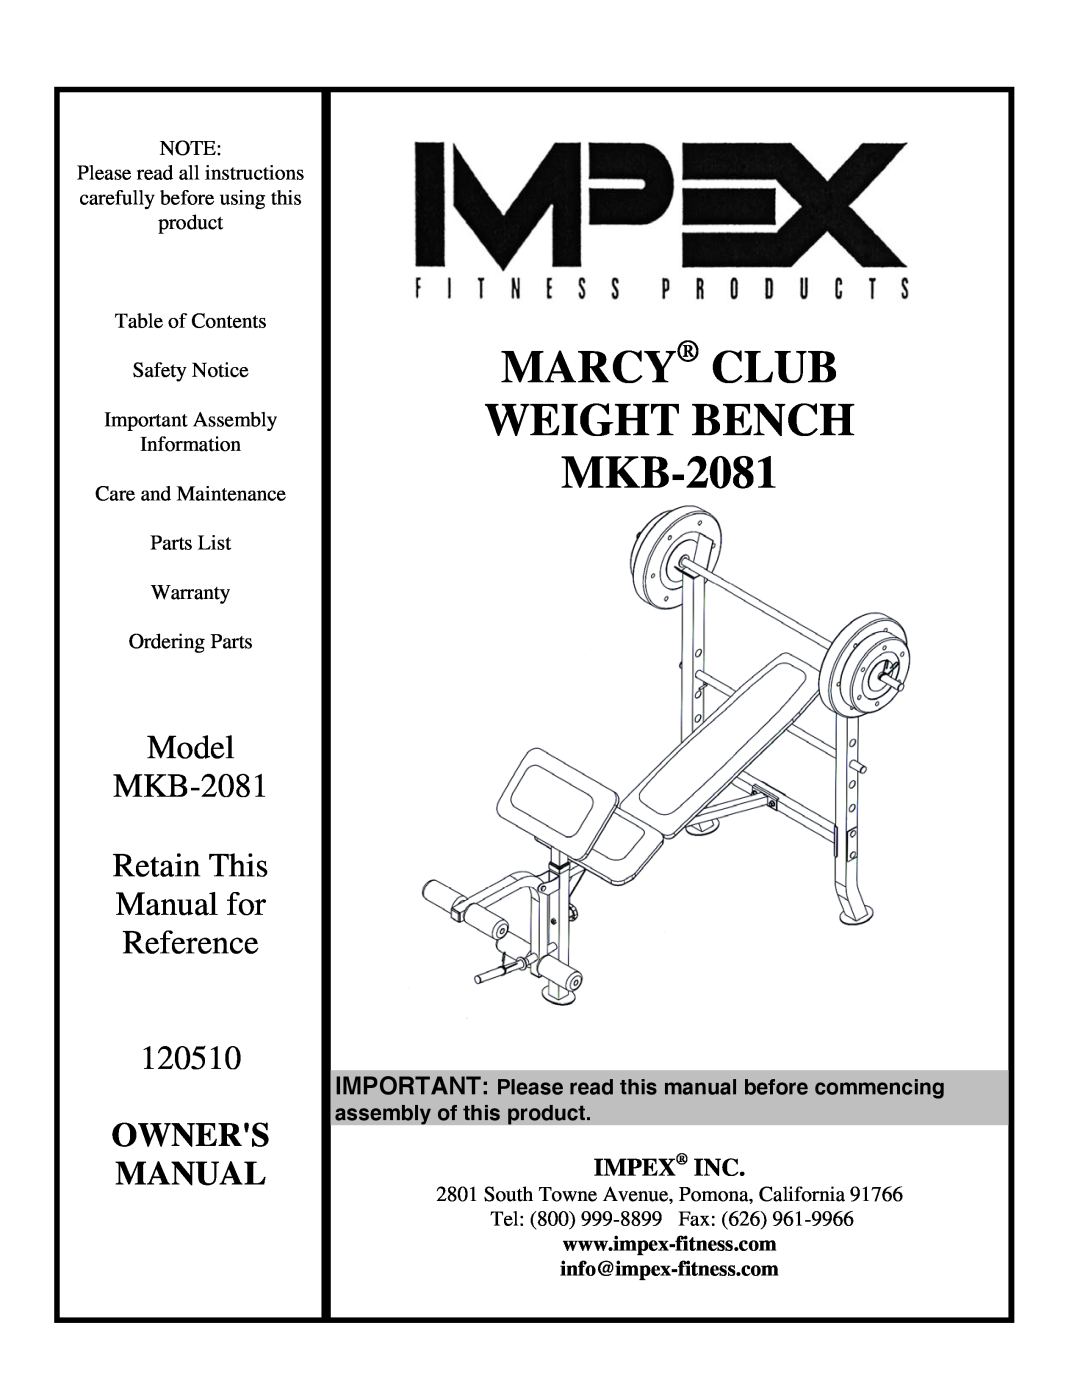 Impex manual MARCY CLUB WEIGHT BENCH MKB-2081, Model MKB-2081 Retain This Manual for Reference 120510, Owners Manual 